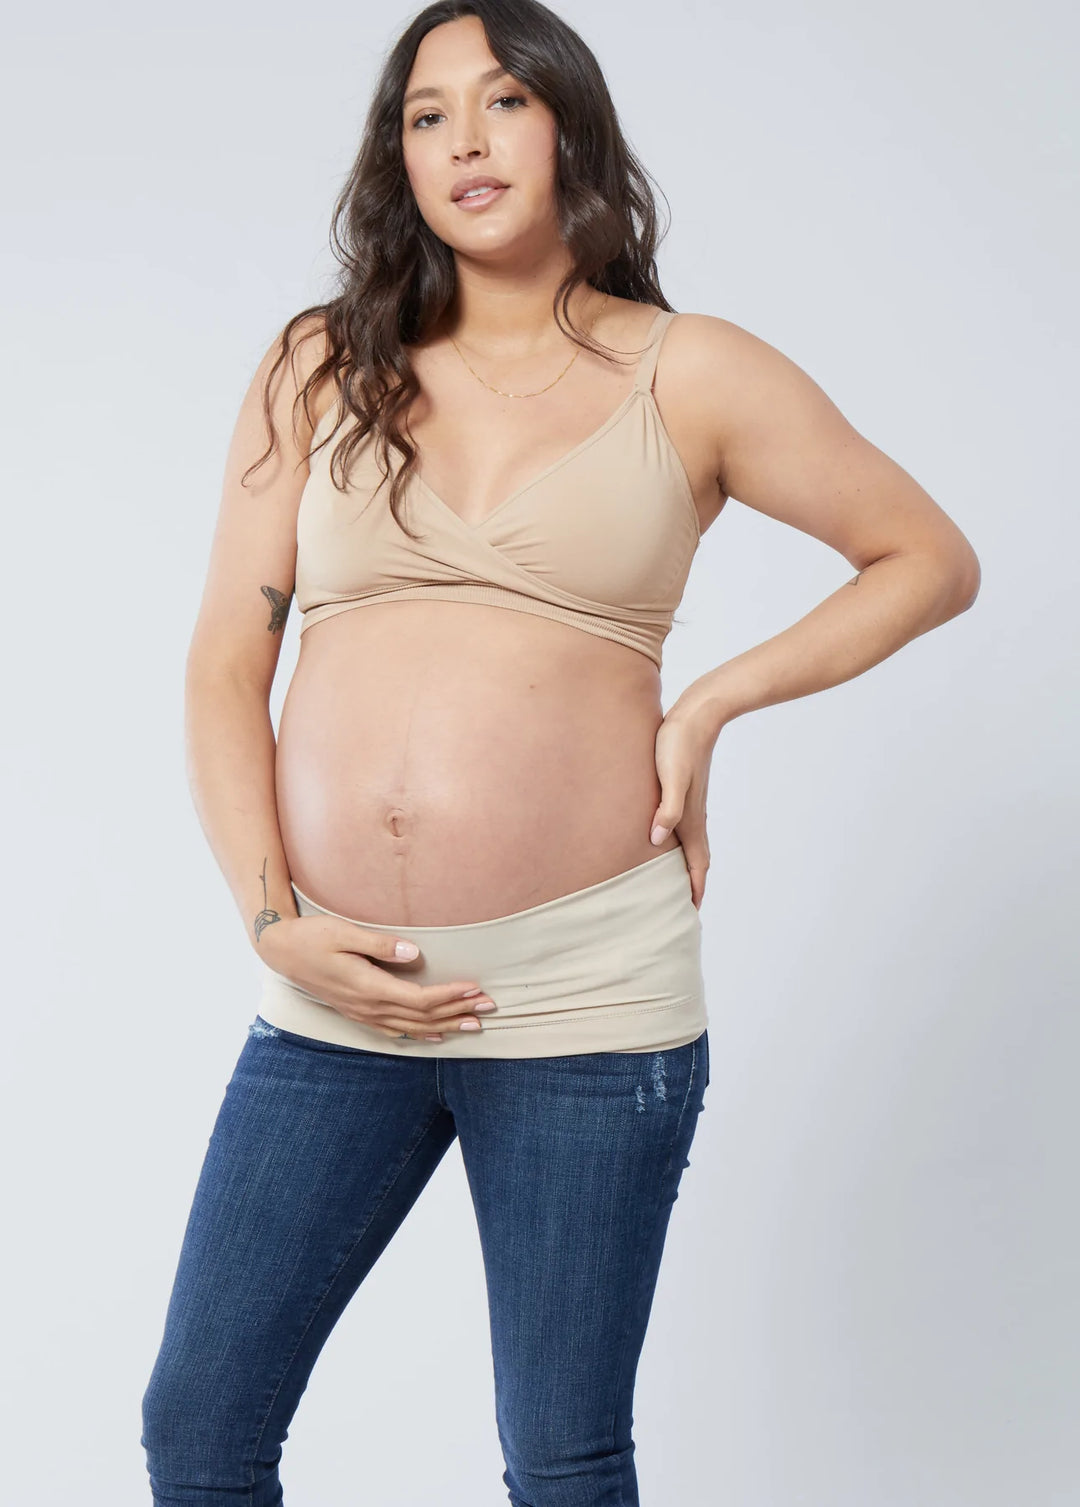 Are belly bands safe to wear during pregnancy? – Belly Bands